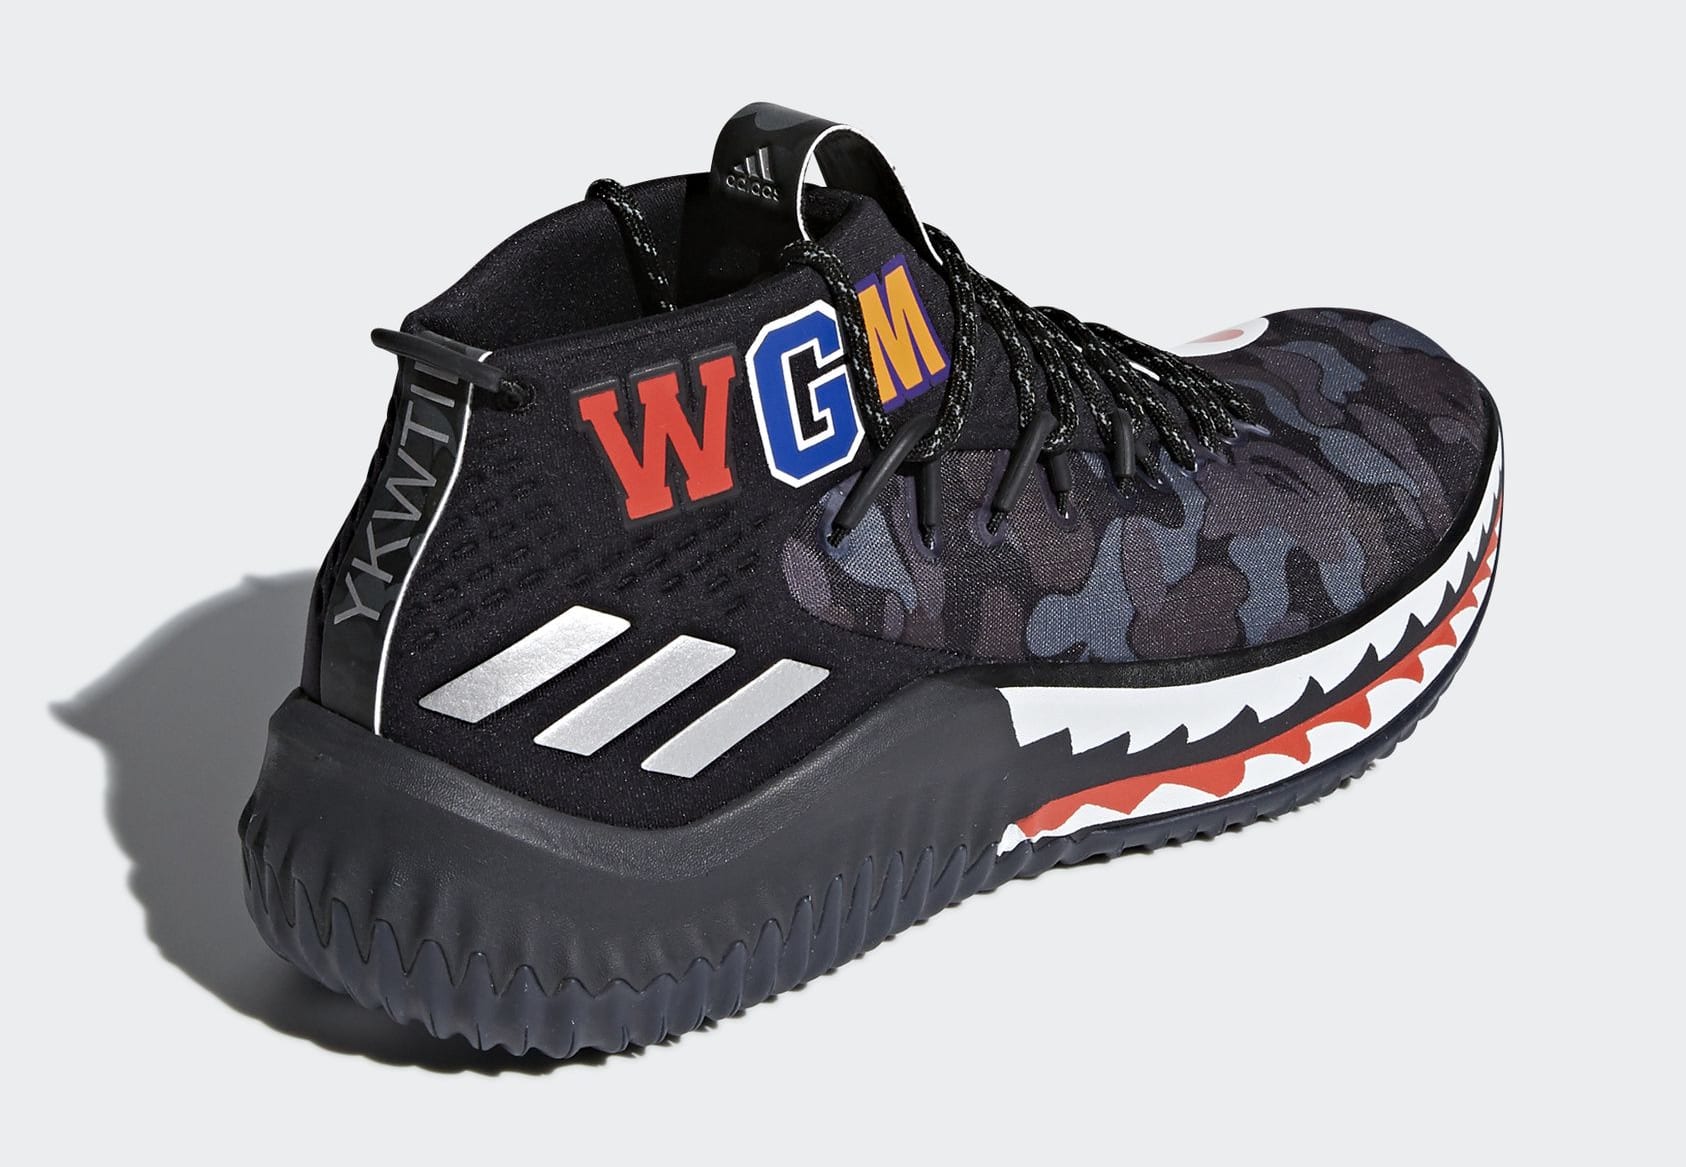 James Dyson Molester Baby The Bape x Adidas Dame 4 Collaboration Has a Release Date | Complex